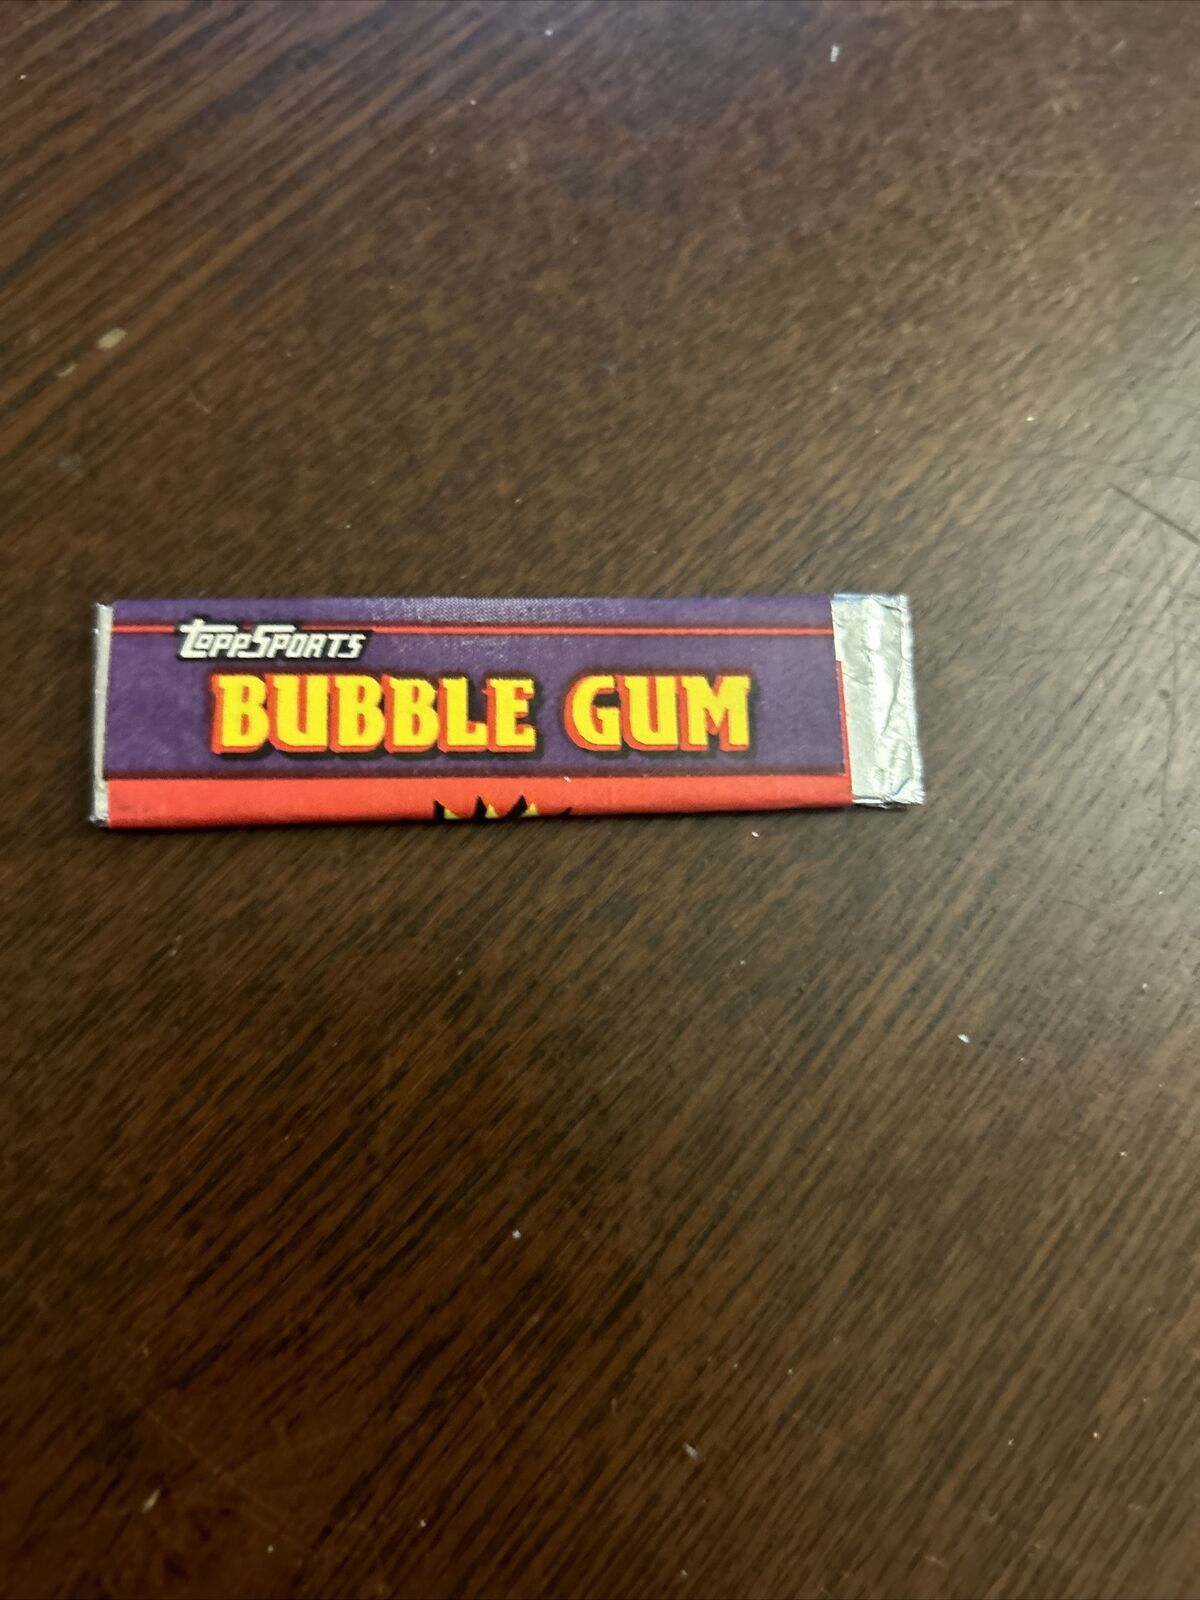 1990s ToppSports (Topps) Baseball Stick of Bubble Gum - Unopened (be1)